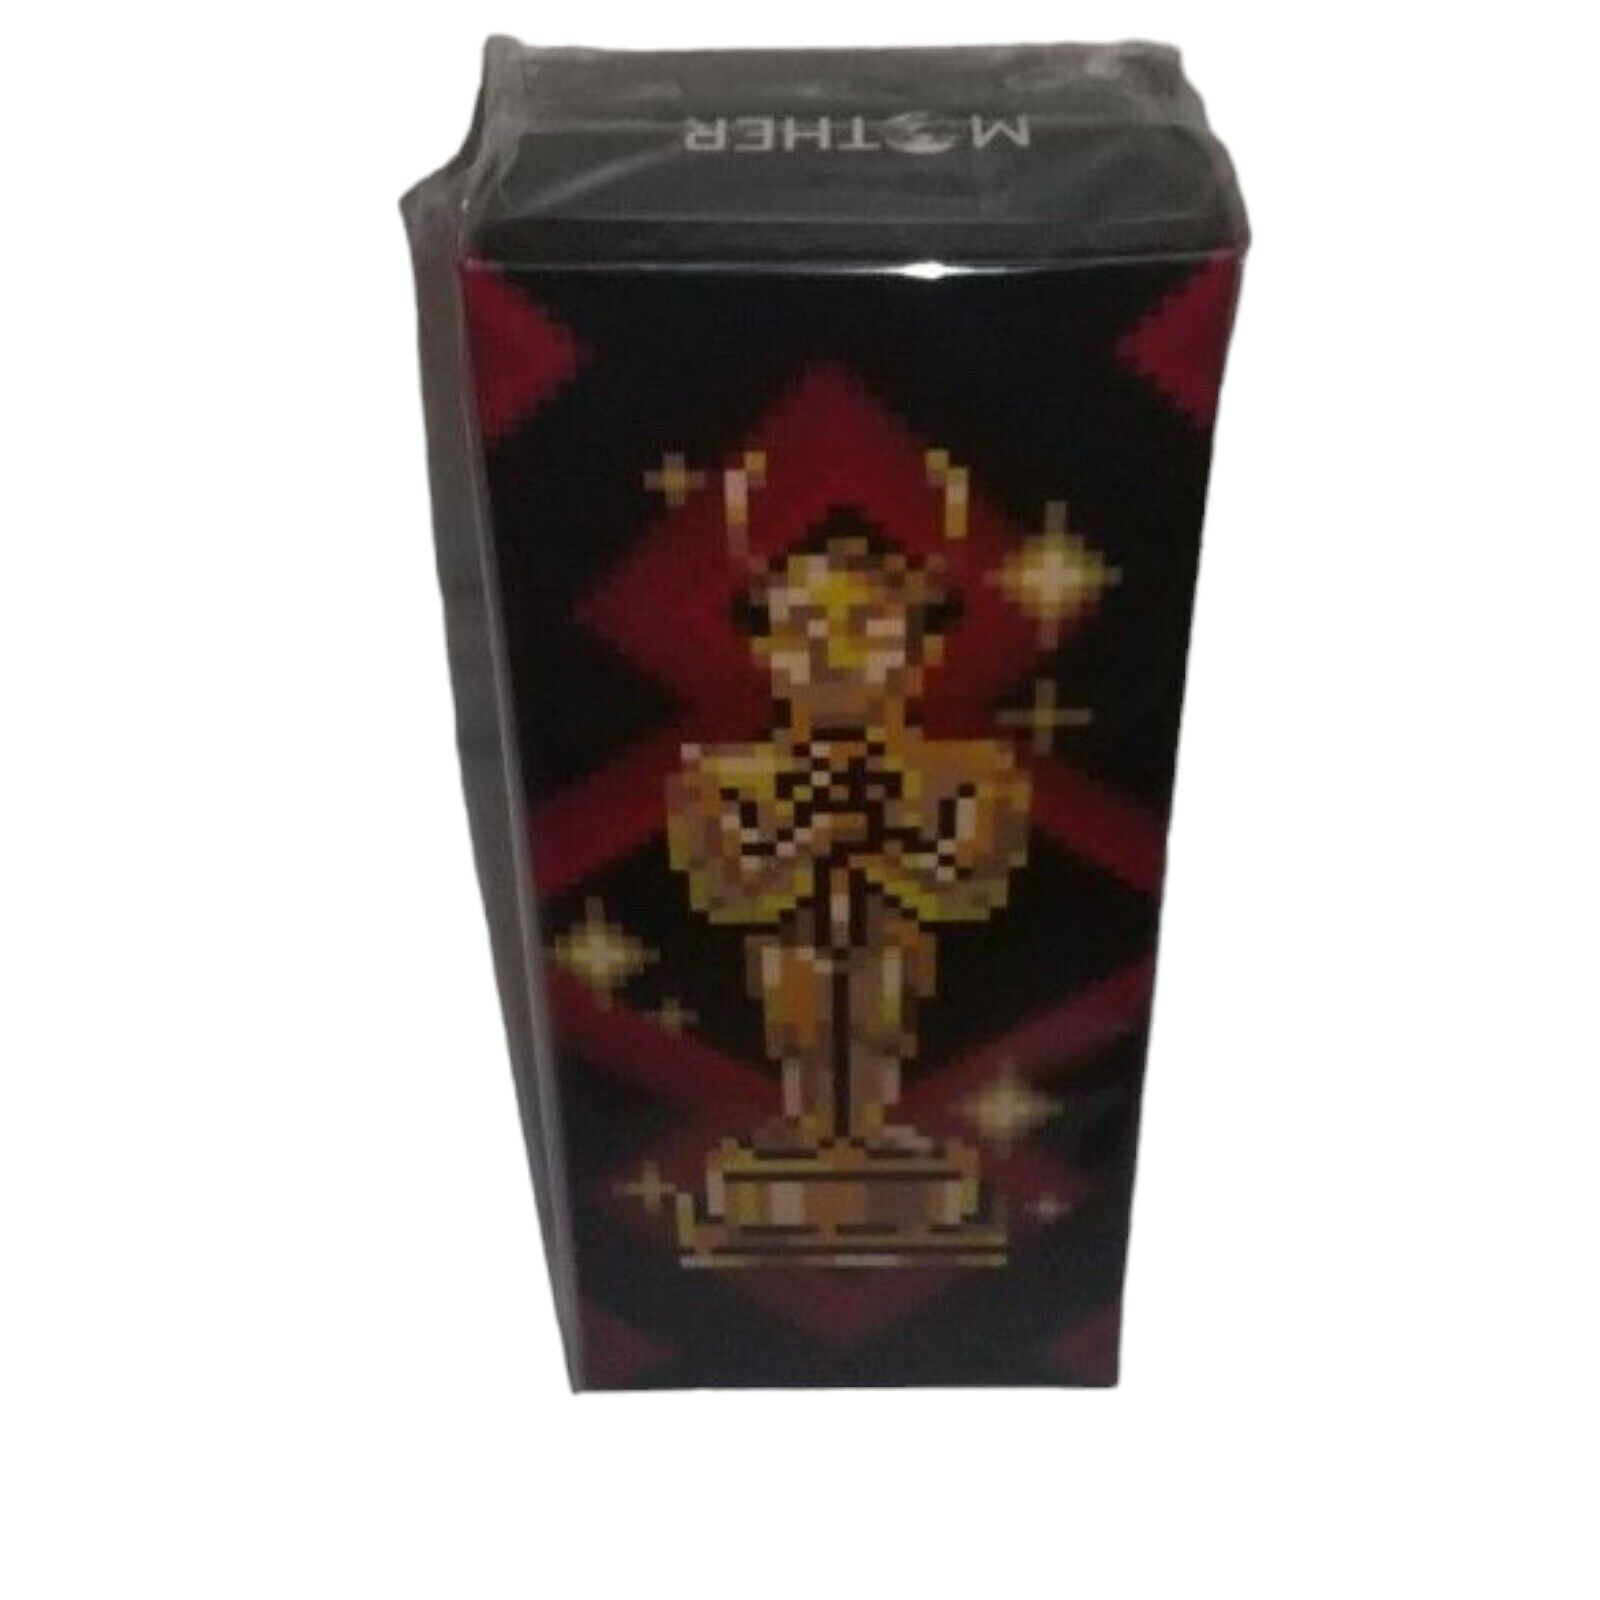 Hobonichi Store Mother 2 Mani Mani golden Statue 200mm 7.87in New